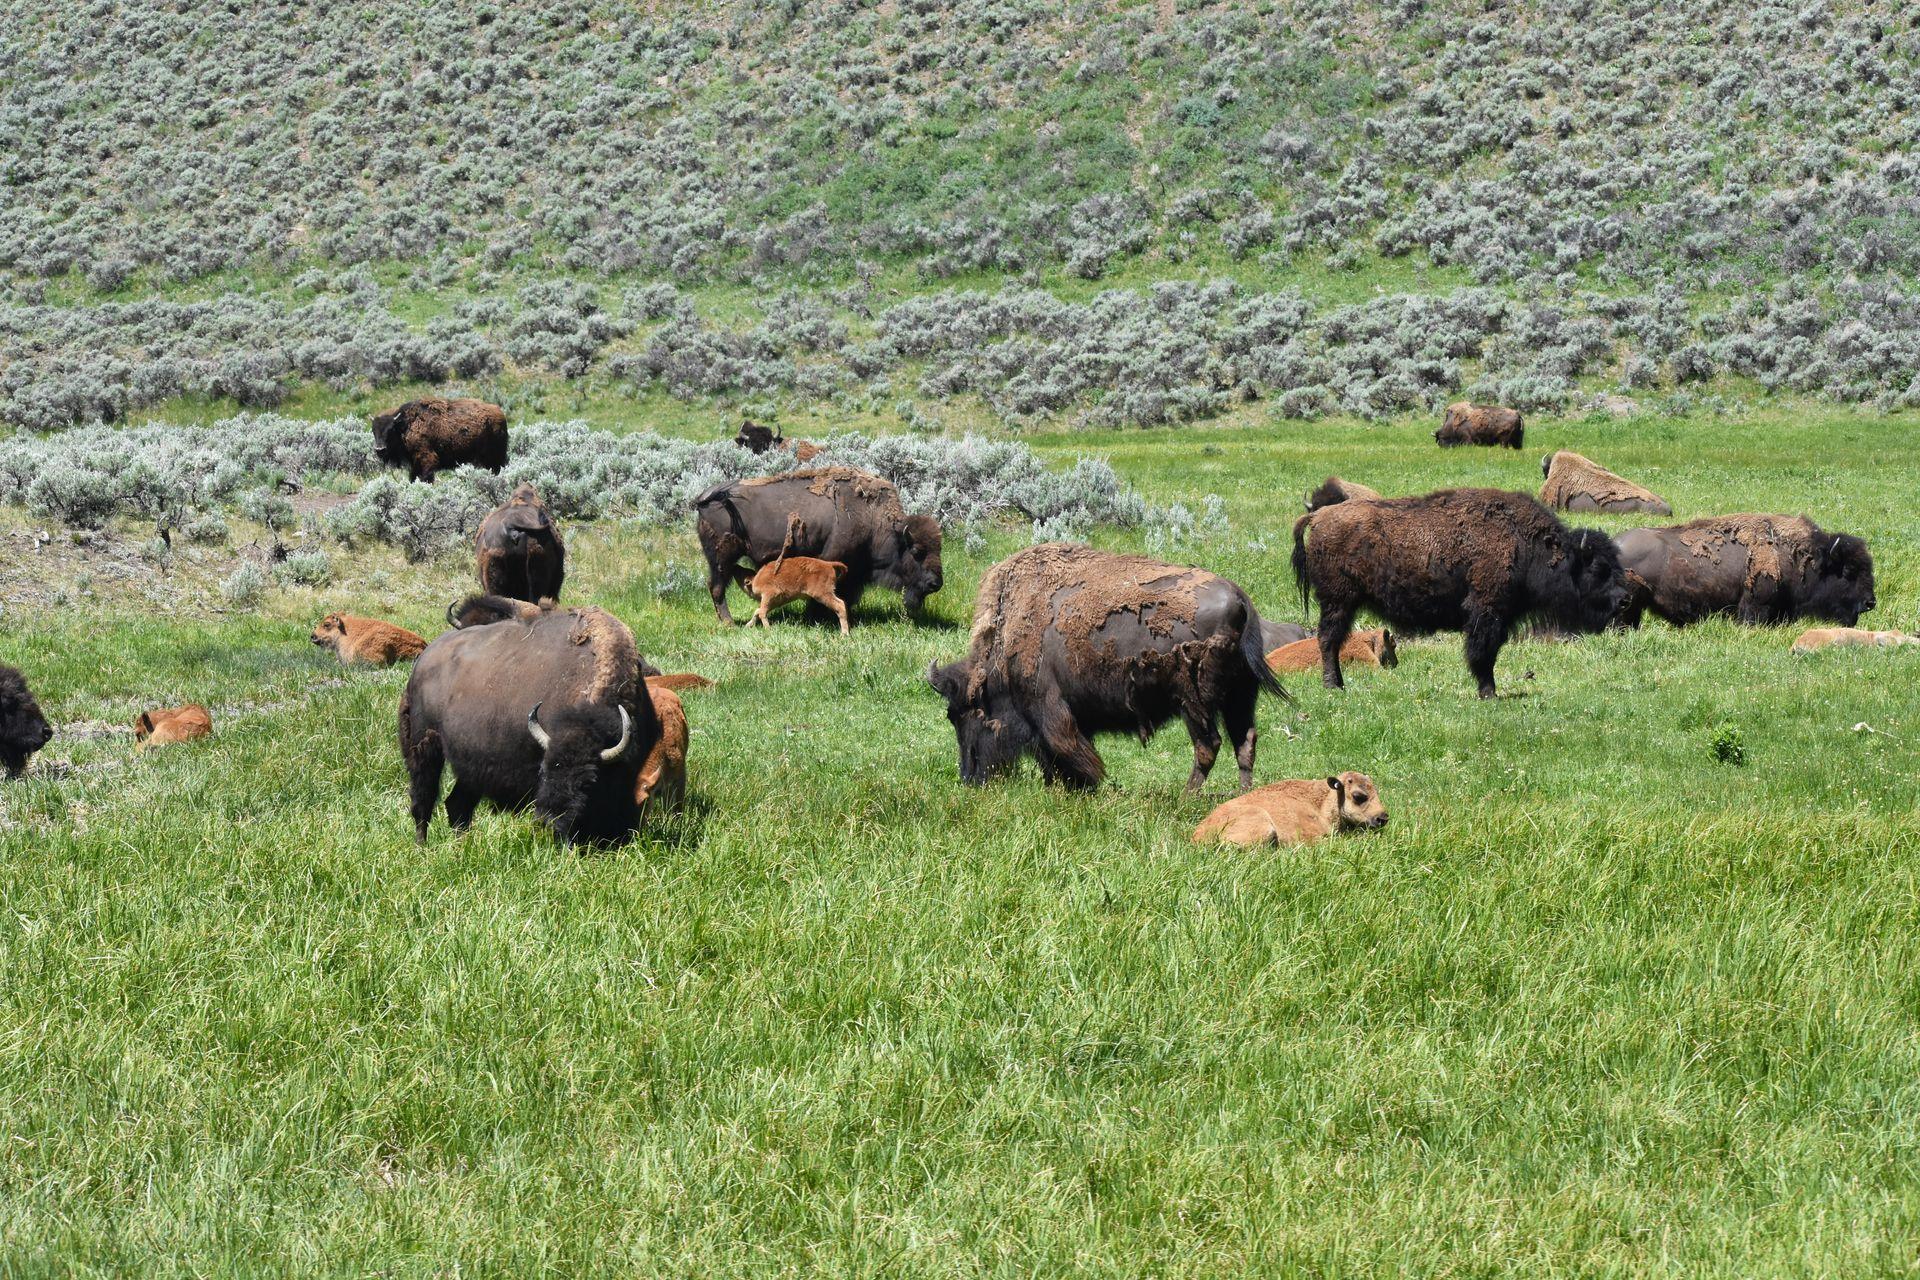 Several bison and bison babies in Lamar Valley.